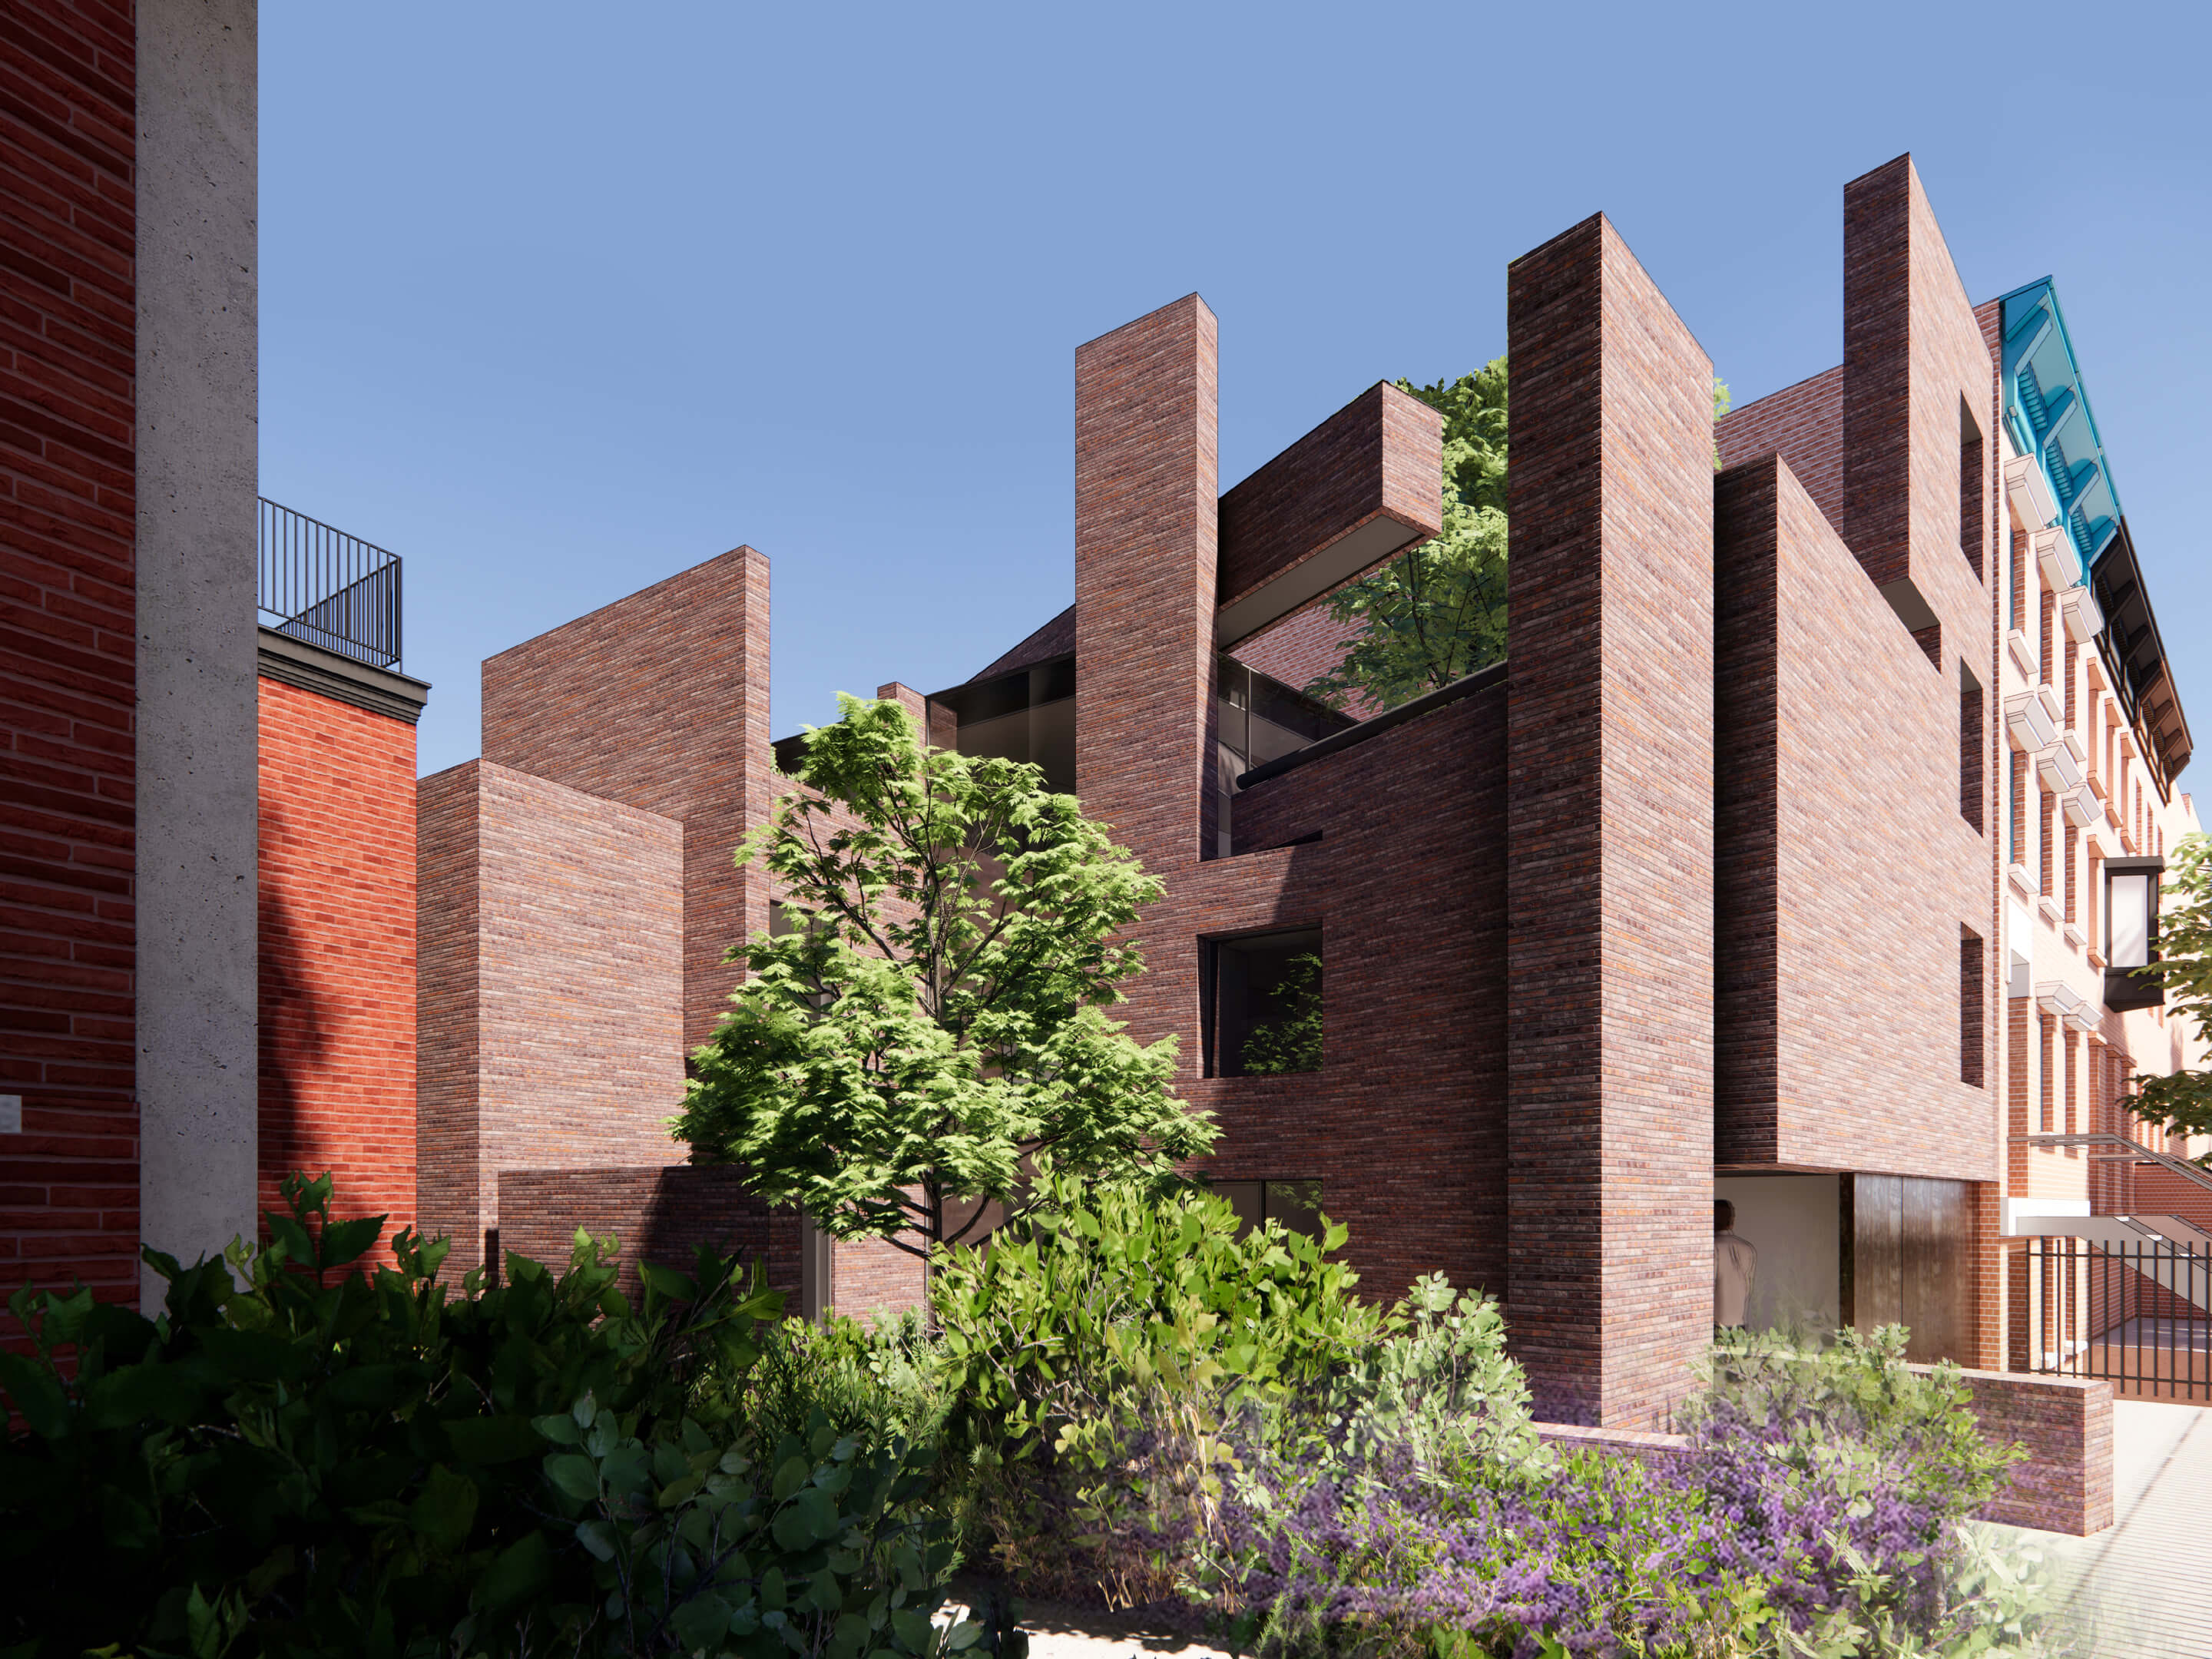 Rendering of a red brick building with slat facade